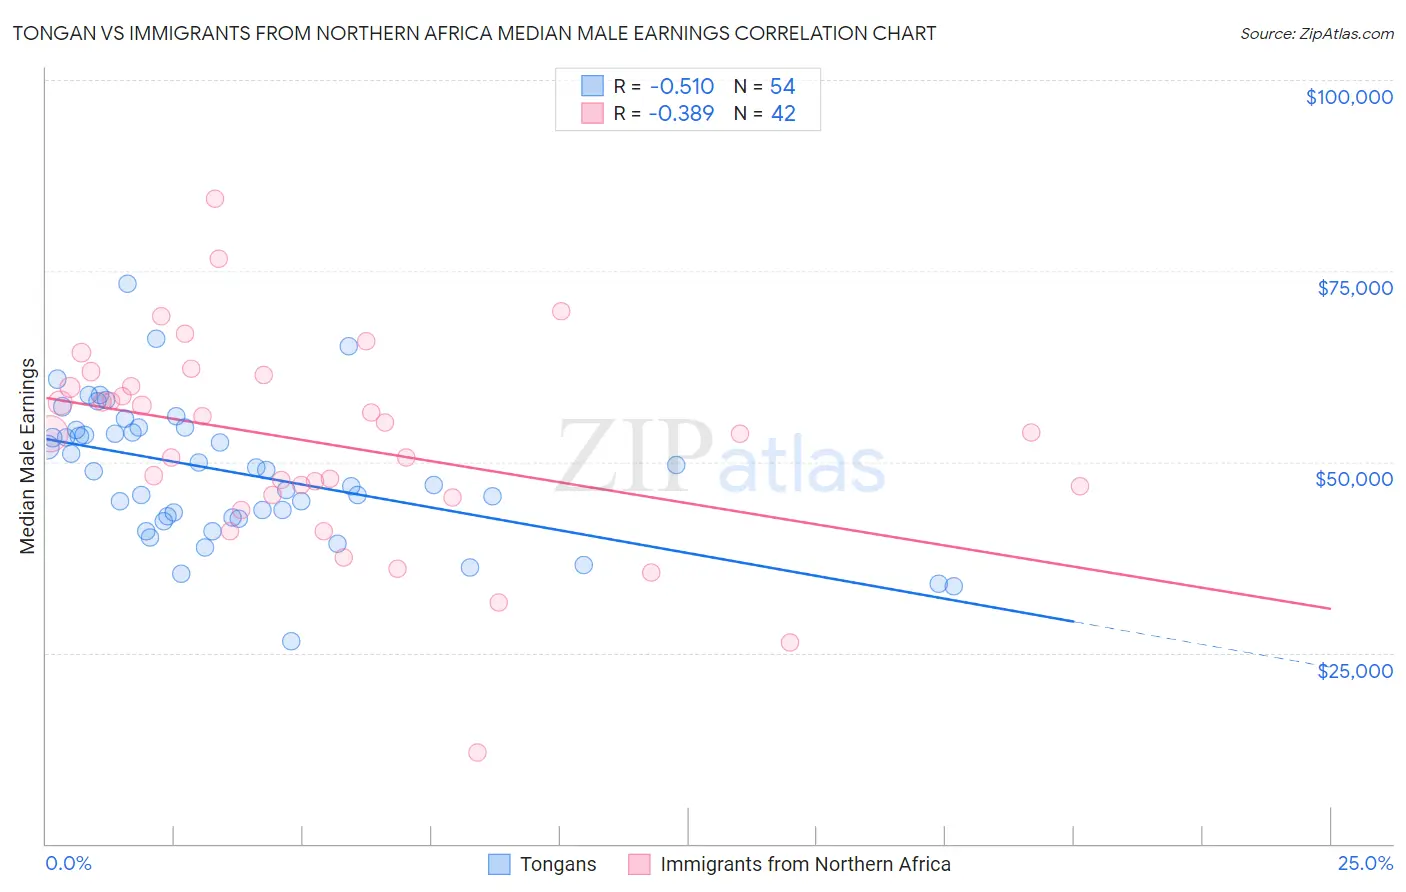 Tongan vs Immigrants from Northern Africa Median Male Earnings